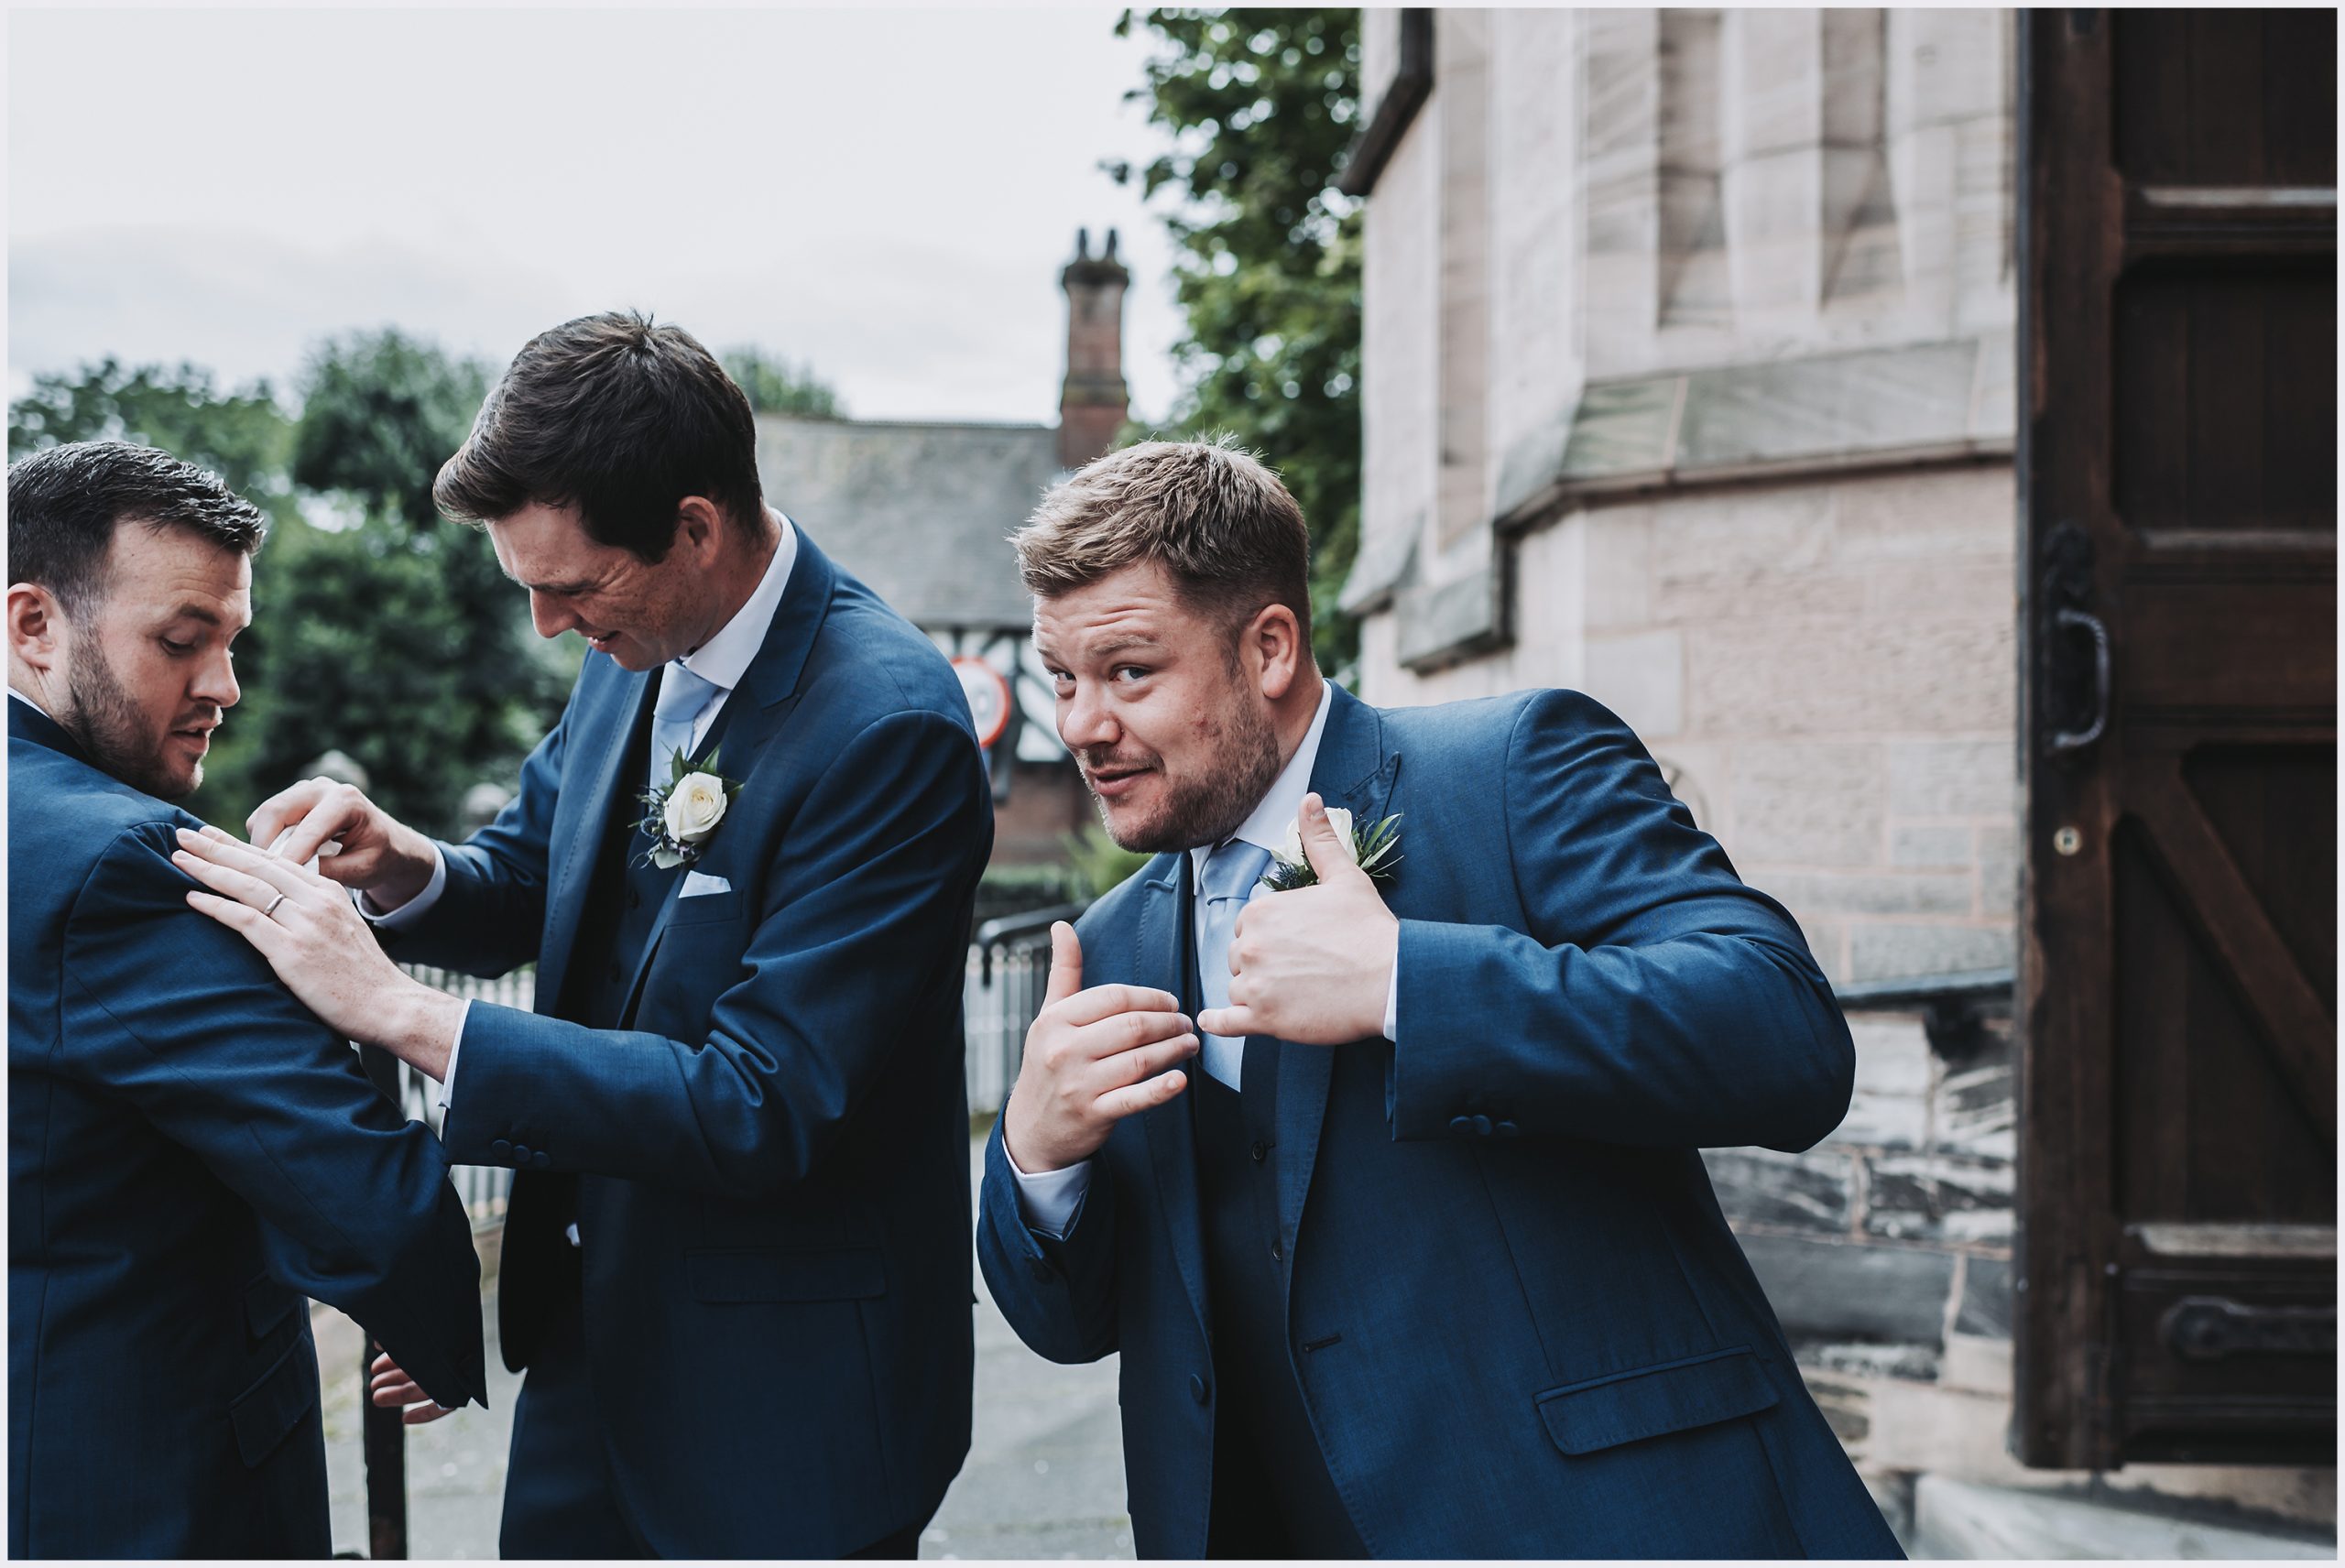 An usher rubs make up off the groom's jacket while another usher gives the thumbs up to the camera after a wedding ceremony in Chester.  Image captured by Chester wedding photographer Helena Jayne Photography